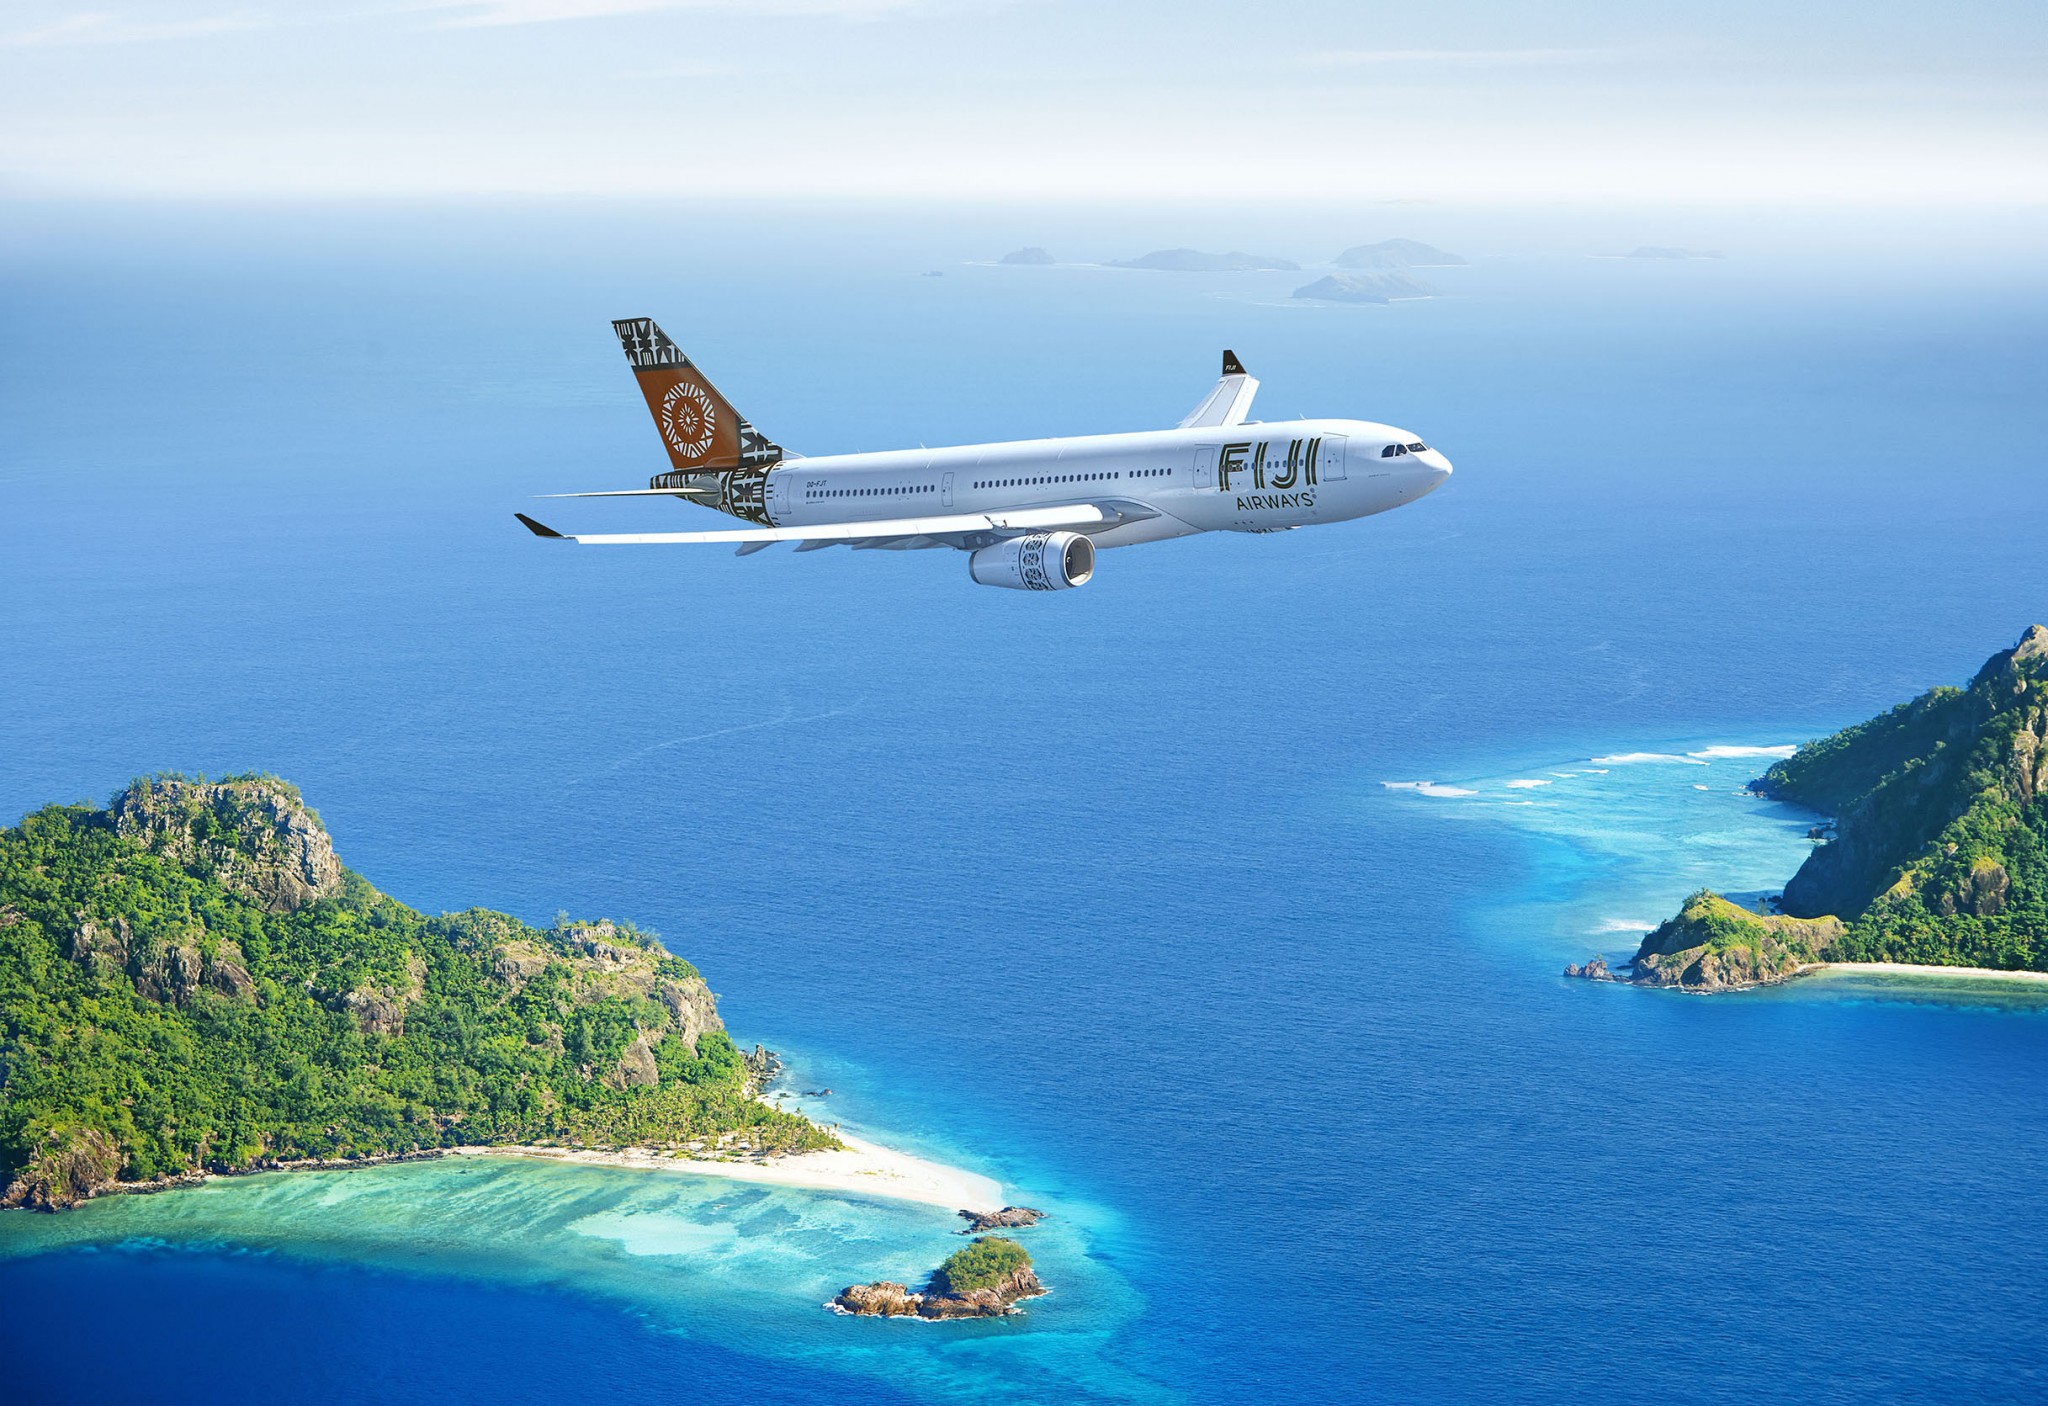 Fiji Airways to acquire a couple more Airbus A350-900